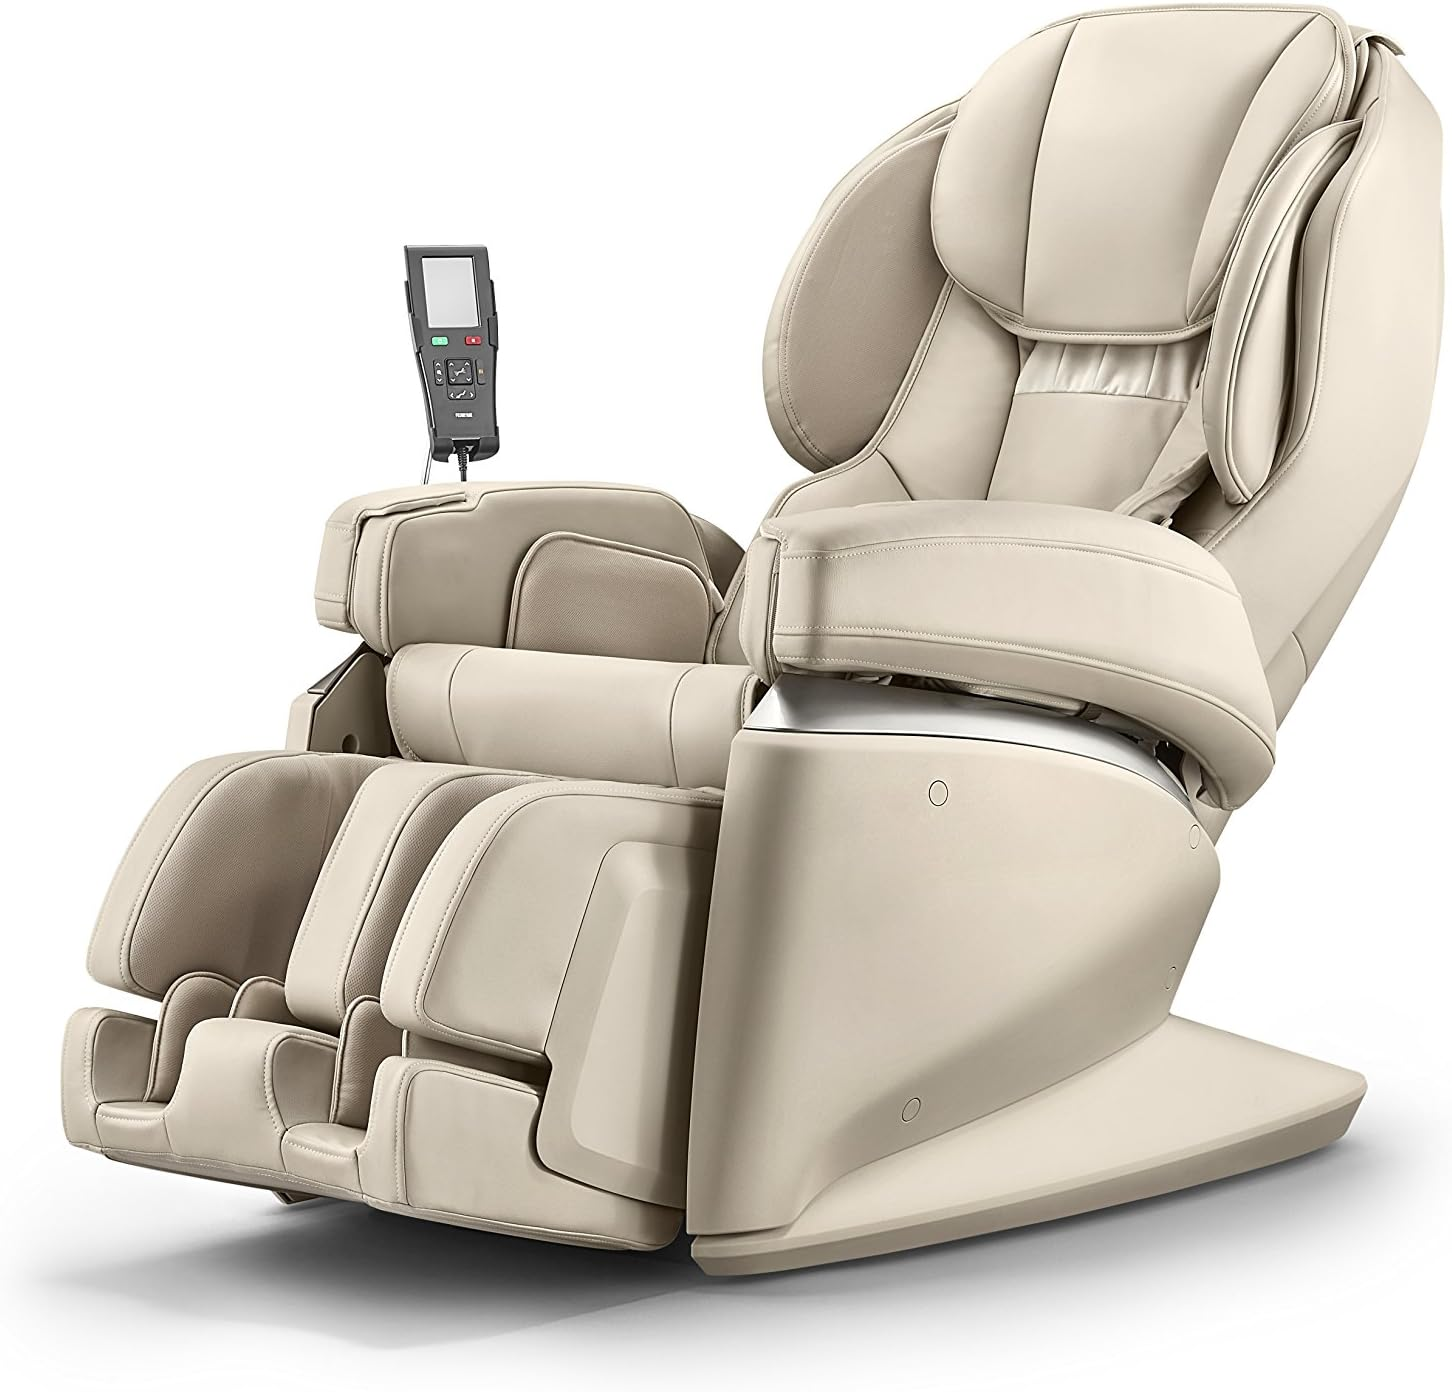 Synca Wellness JP1100 - Made in Japan 4D Massage Chair  - Best Japanese Massage Chairs